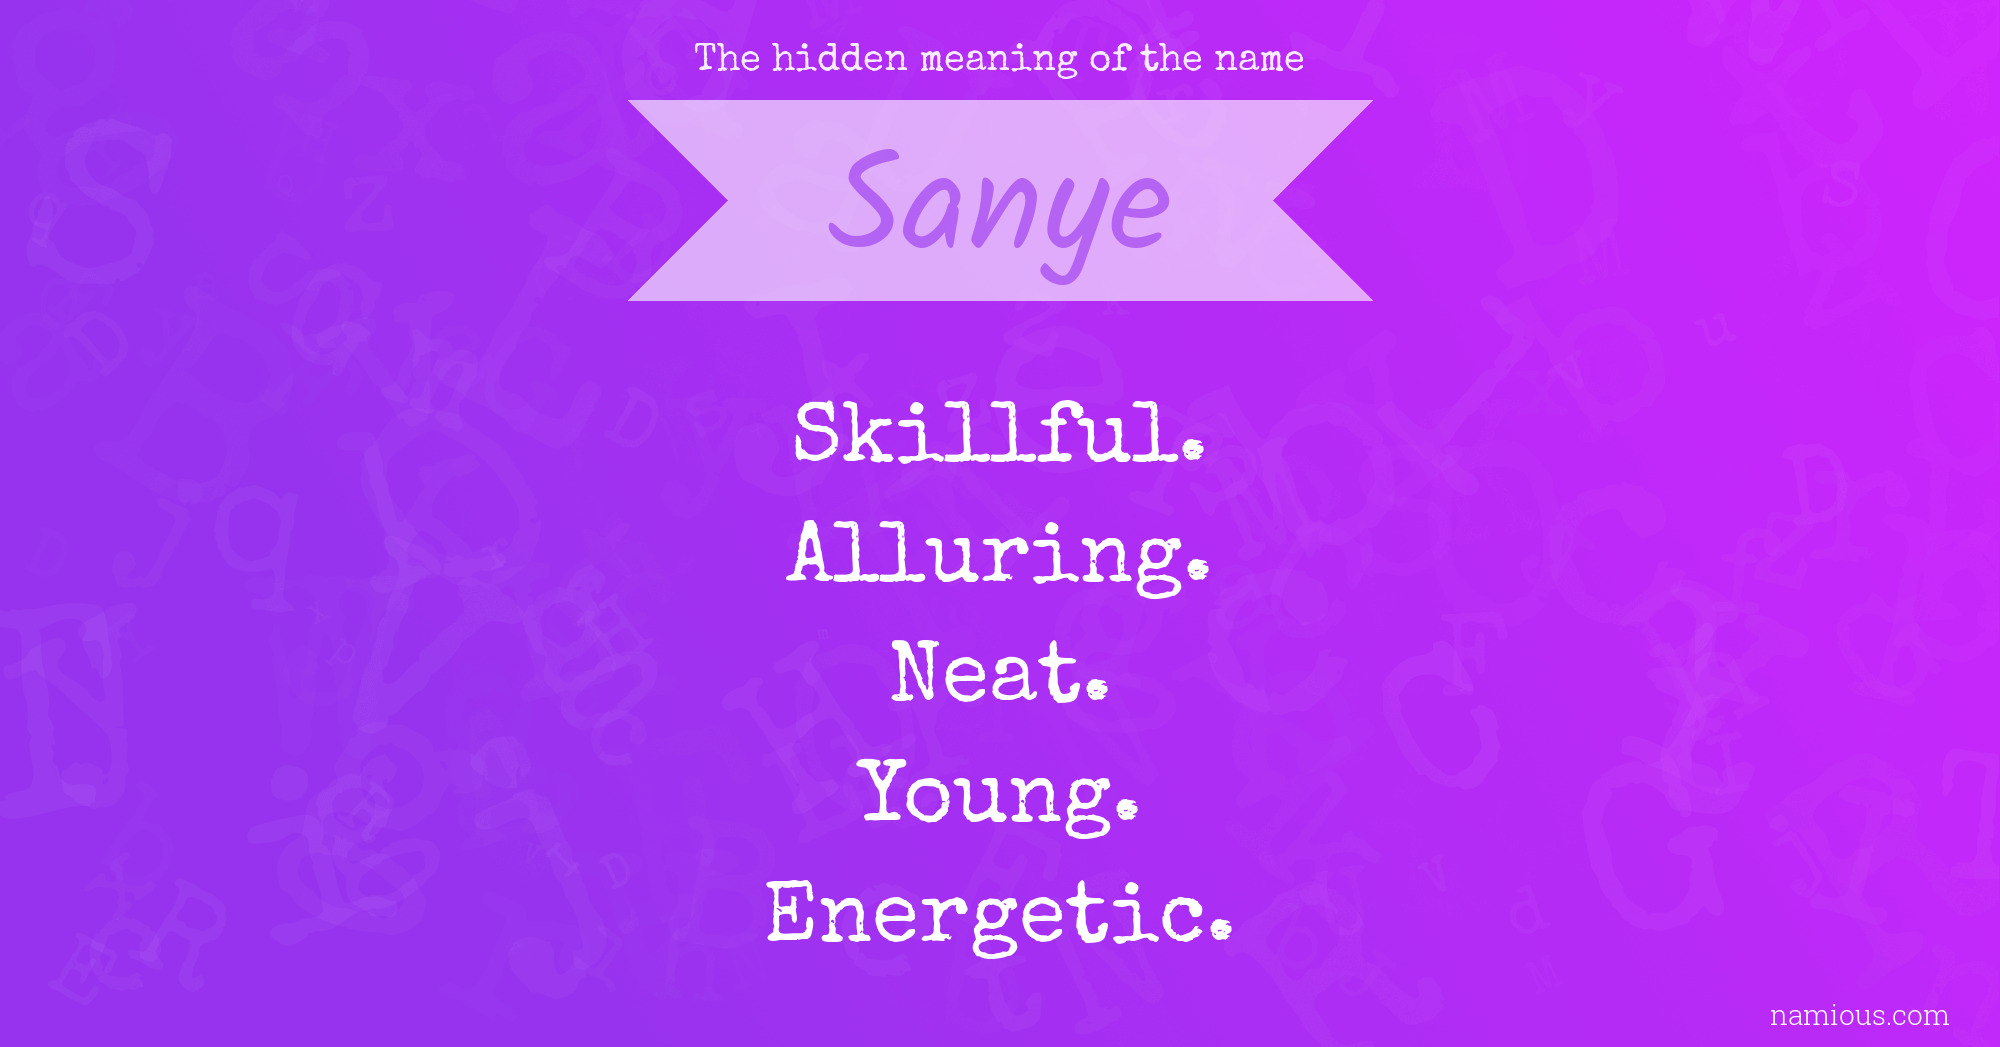 The hidden meaning of the name Sanye